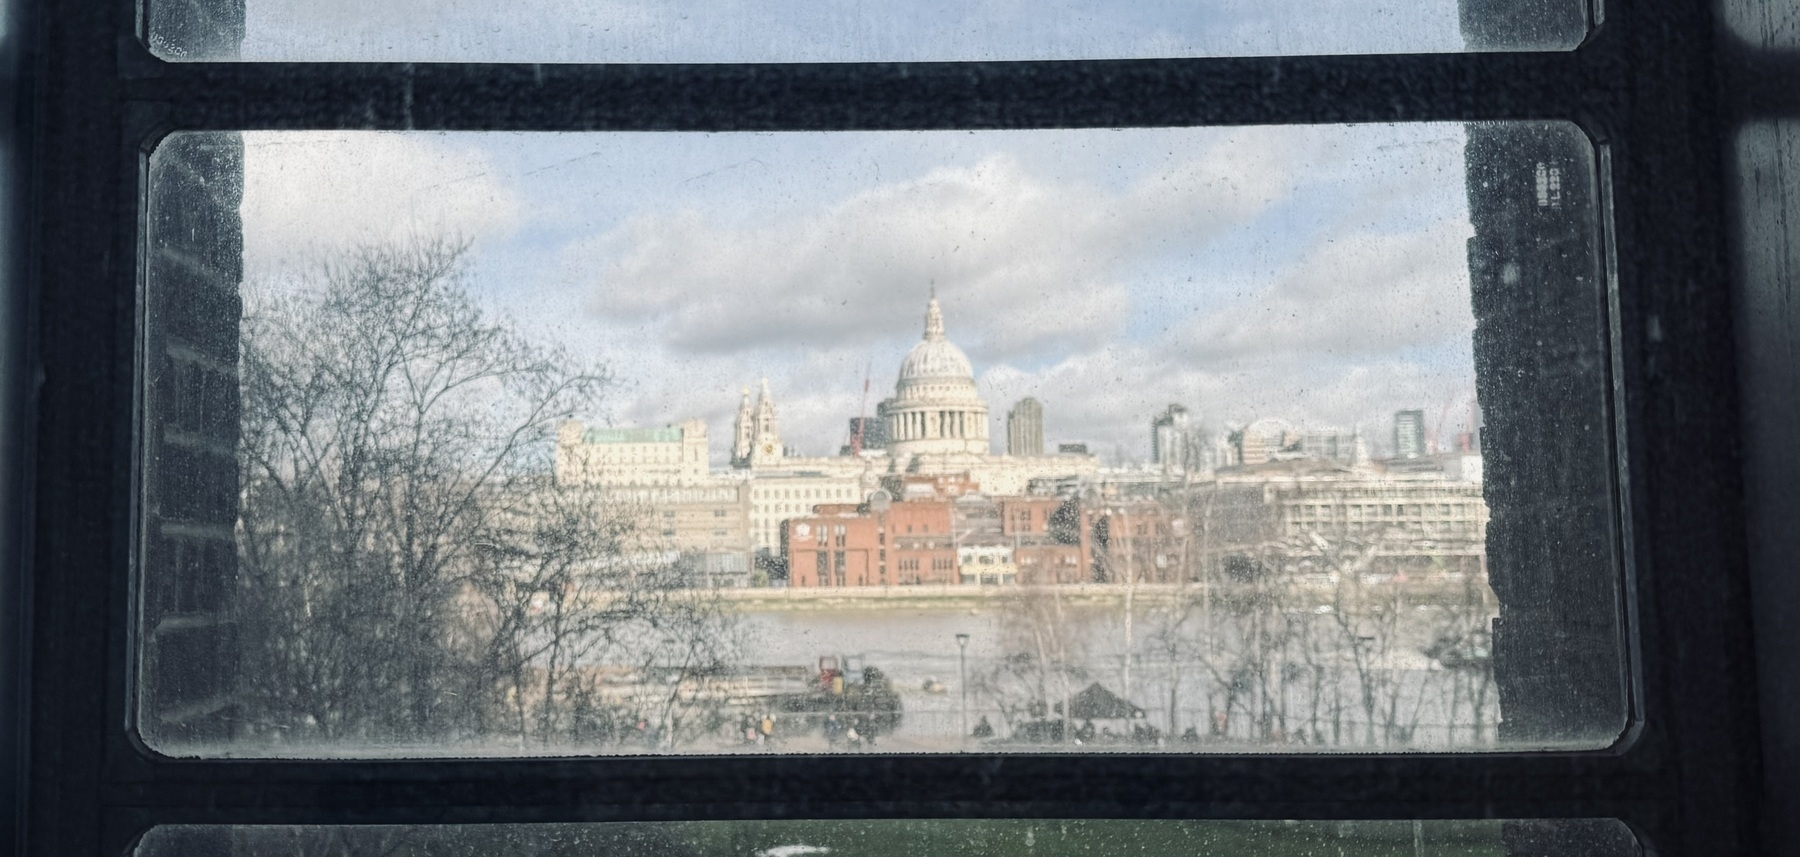 St Paul’s cathedral and the river Thames seen through a dirty window.